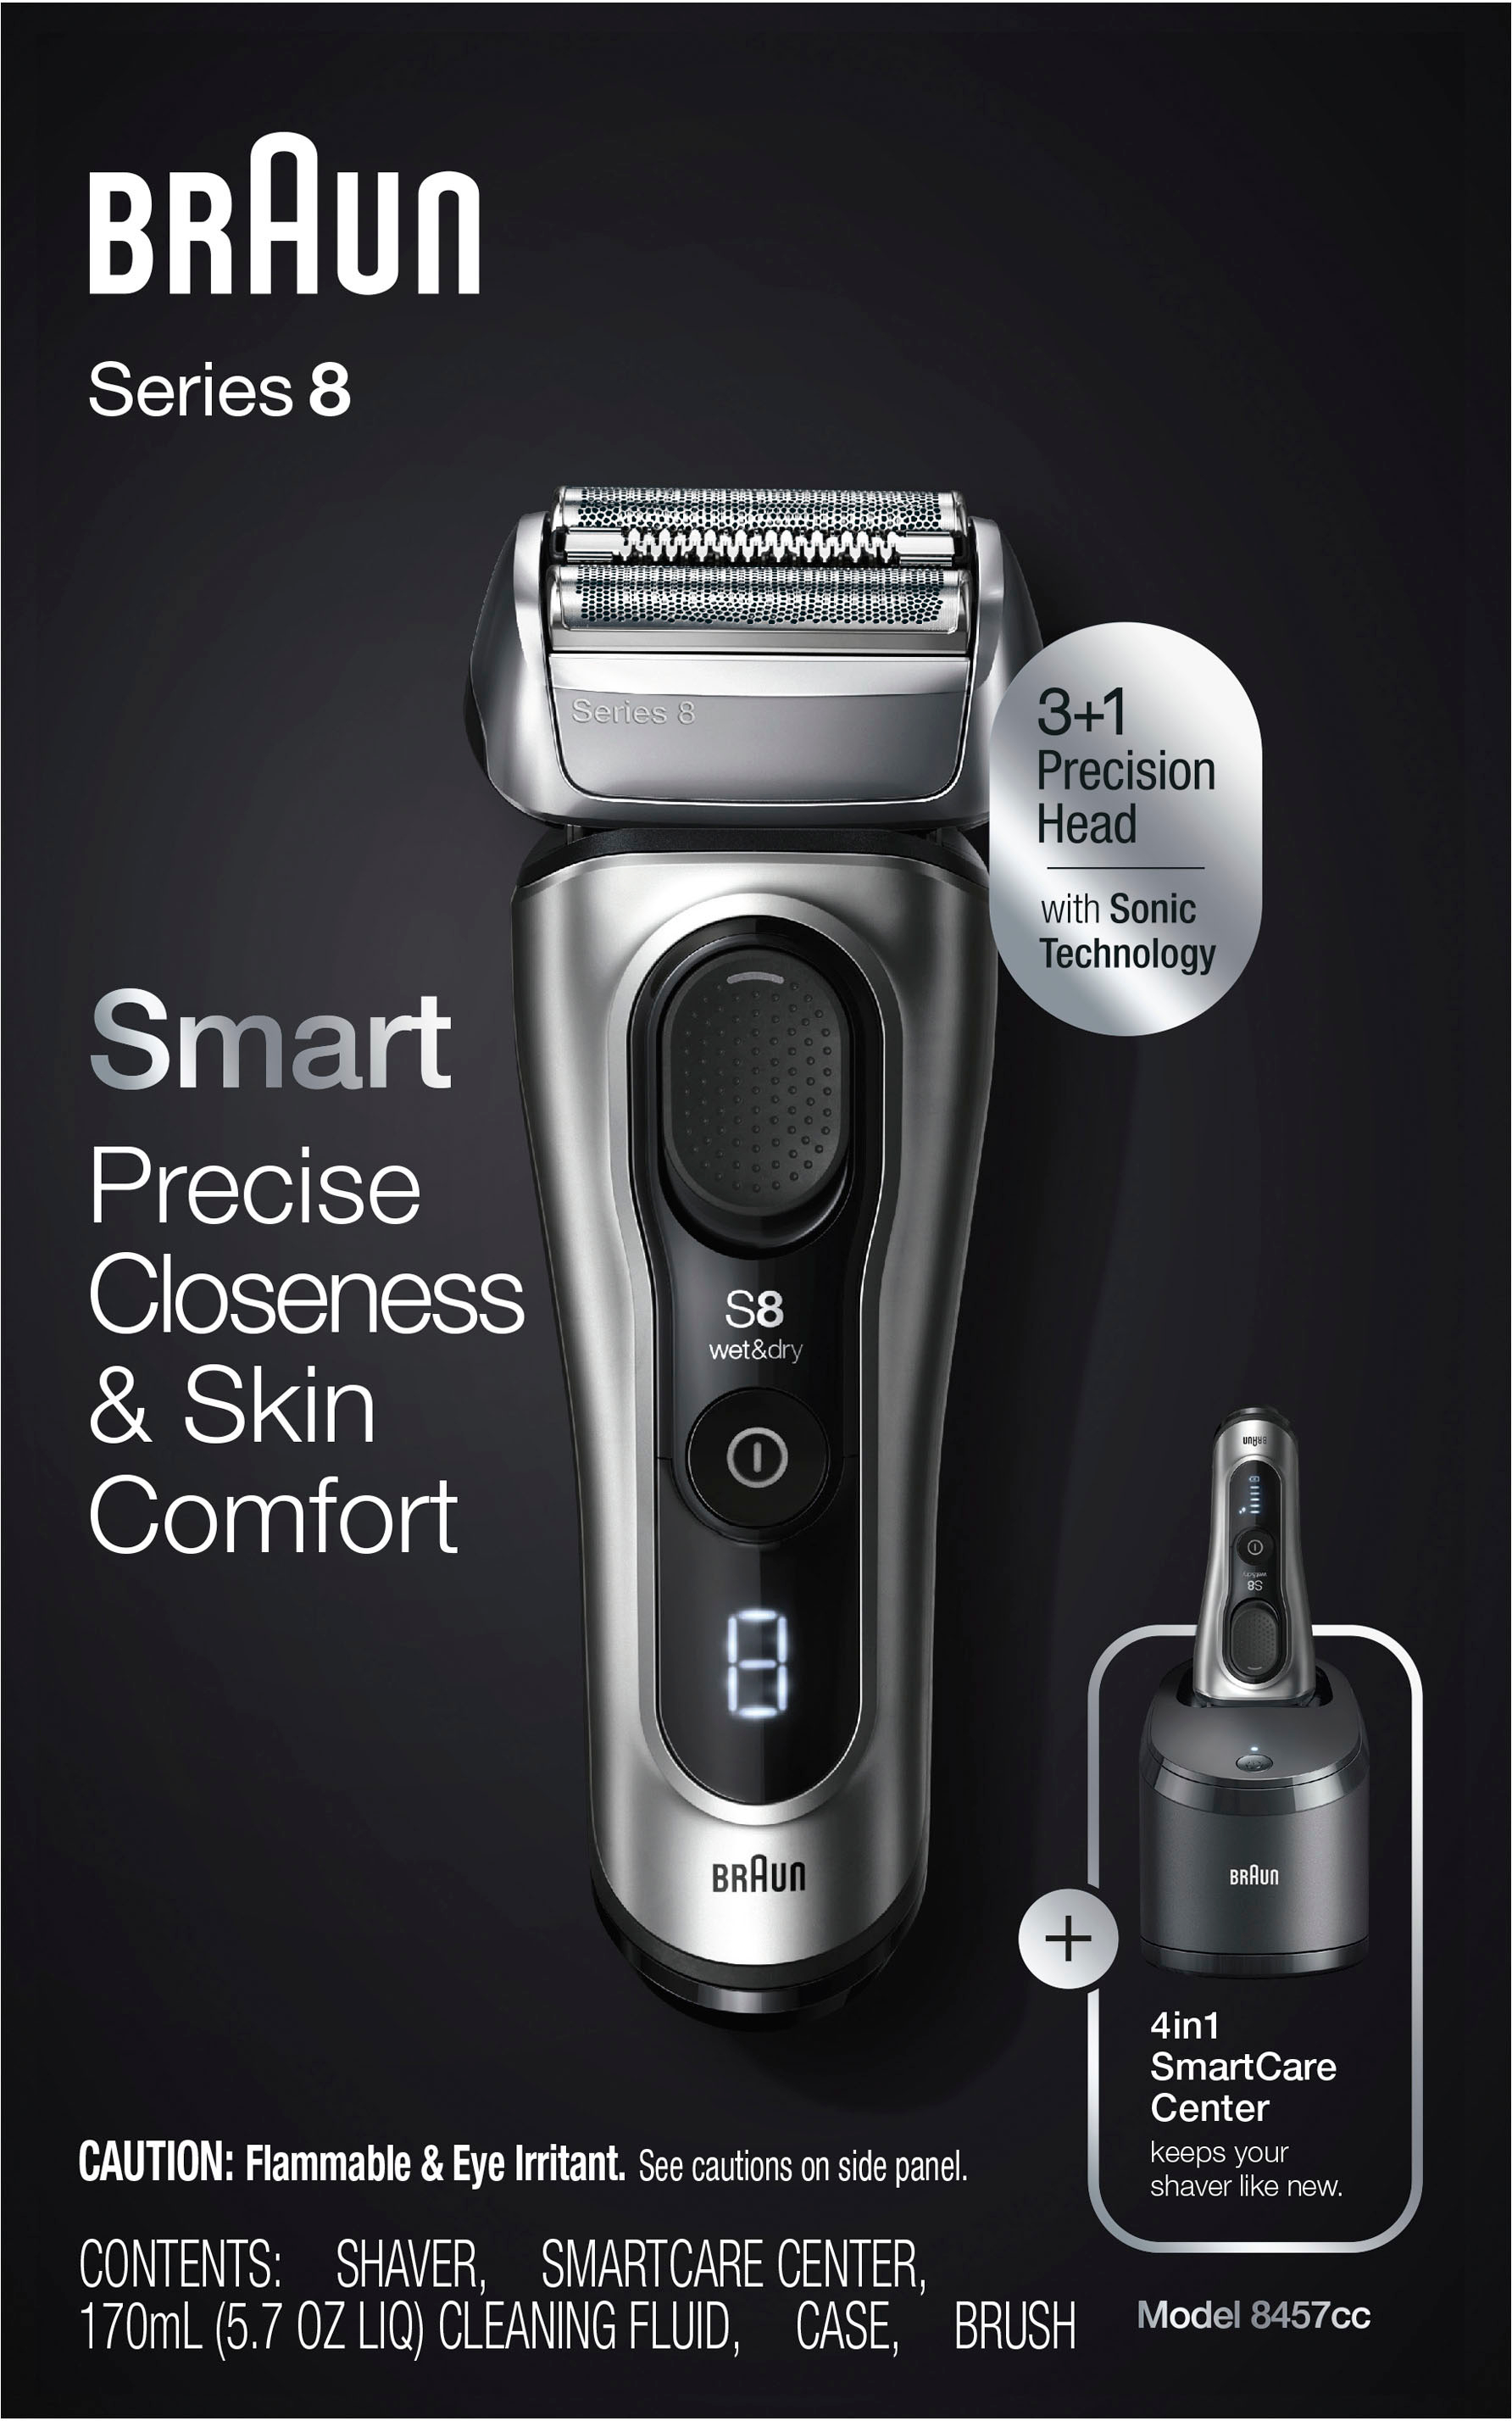 0069055889701 - BRAUN ELECTRIC RAZOR FOR MEN, SERIES 8 8457CC ELECTRIC FOIL SHAVER WITH PRECISION BEARD TRIMMER, CLEANING & CHARGING SMARTCARE CENTER, GALVANO SLIVER